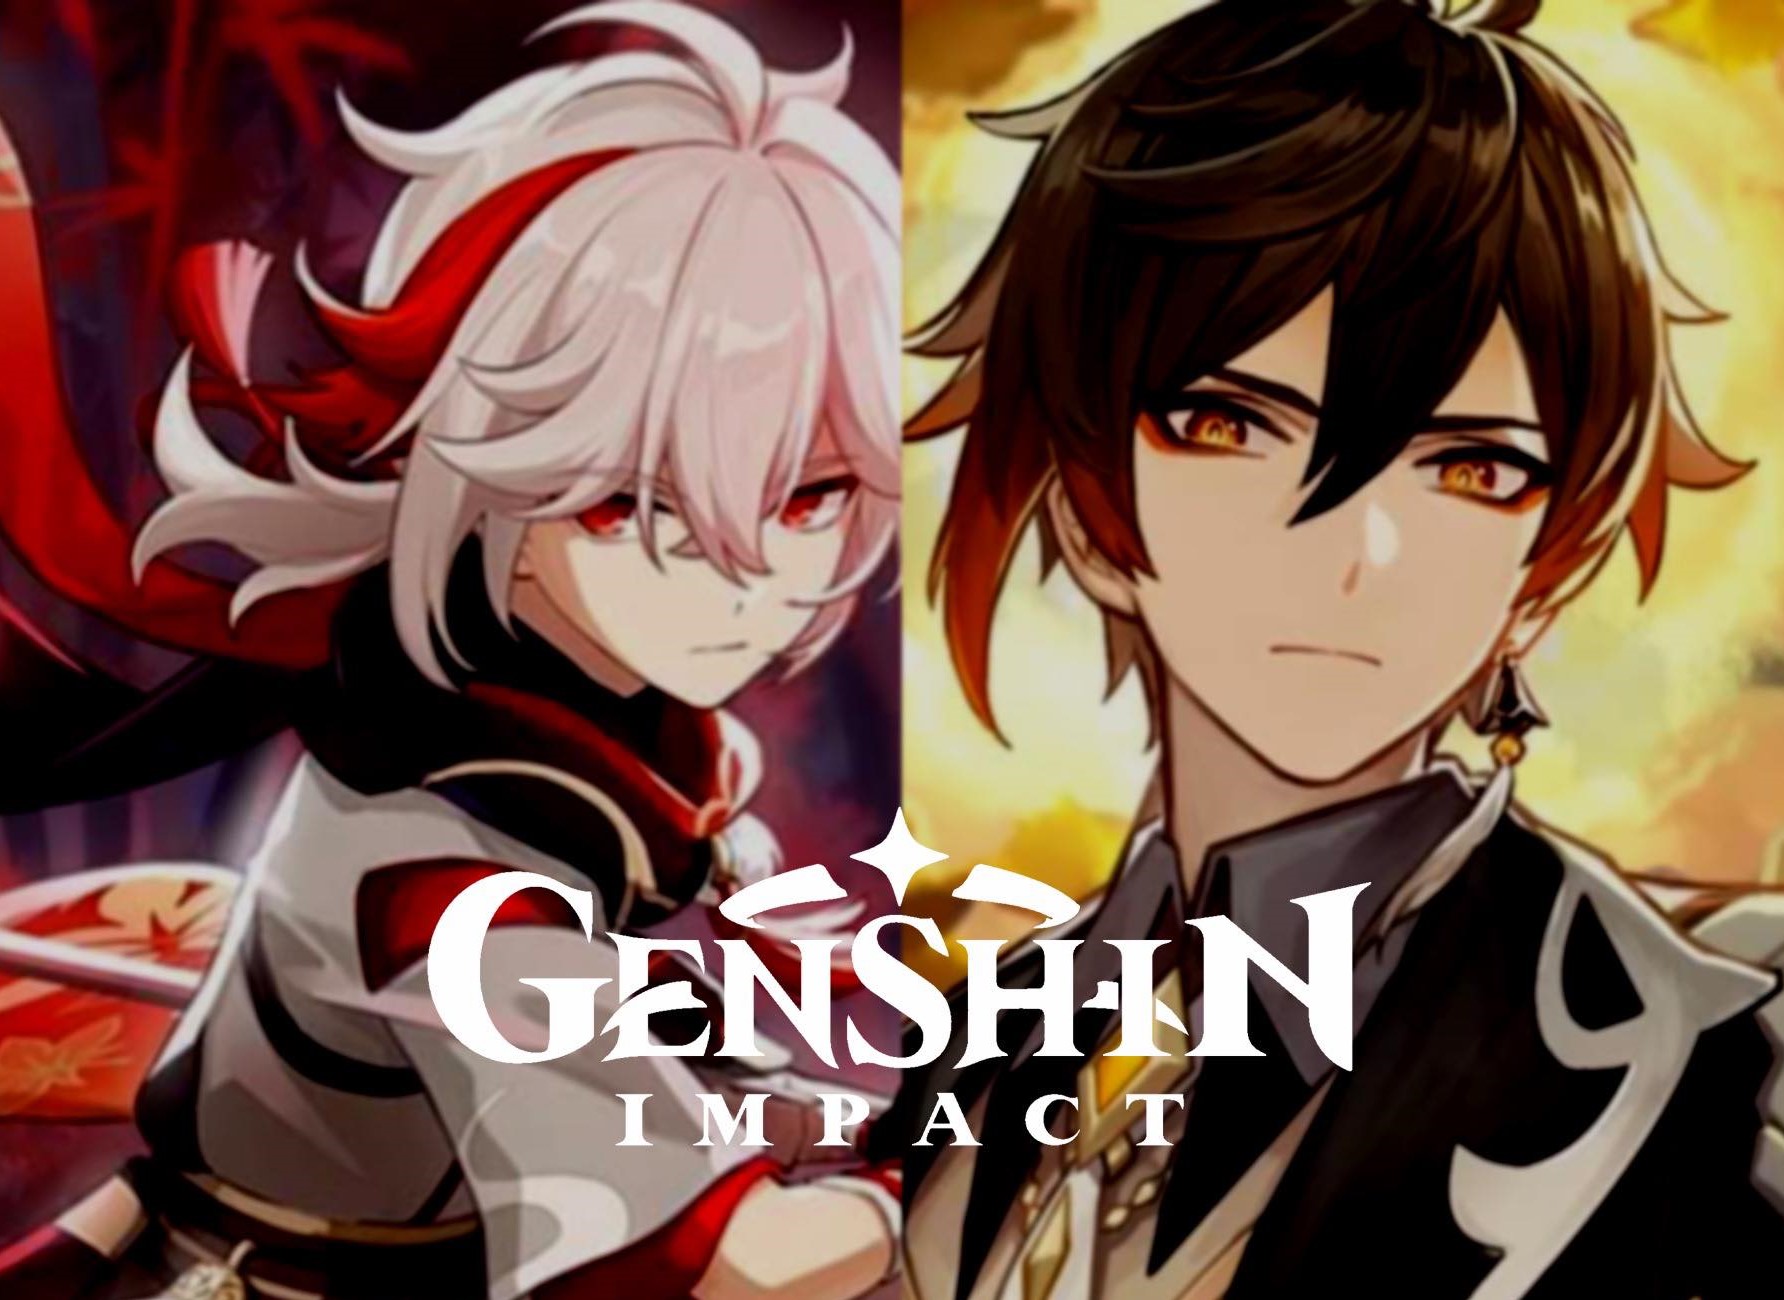 Genshin Impact 3.7 Livestream Date, Time and How to Watch